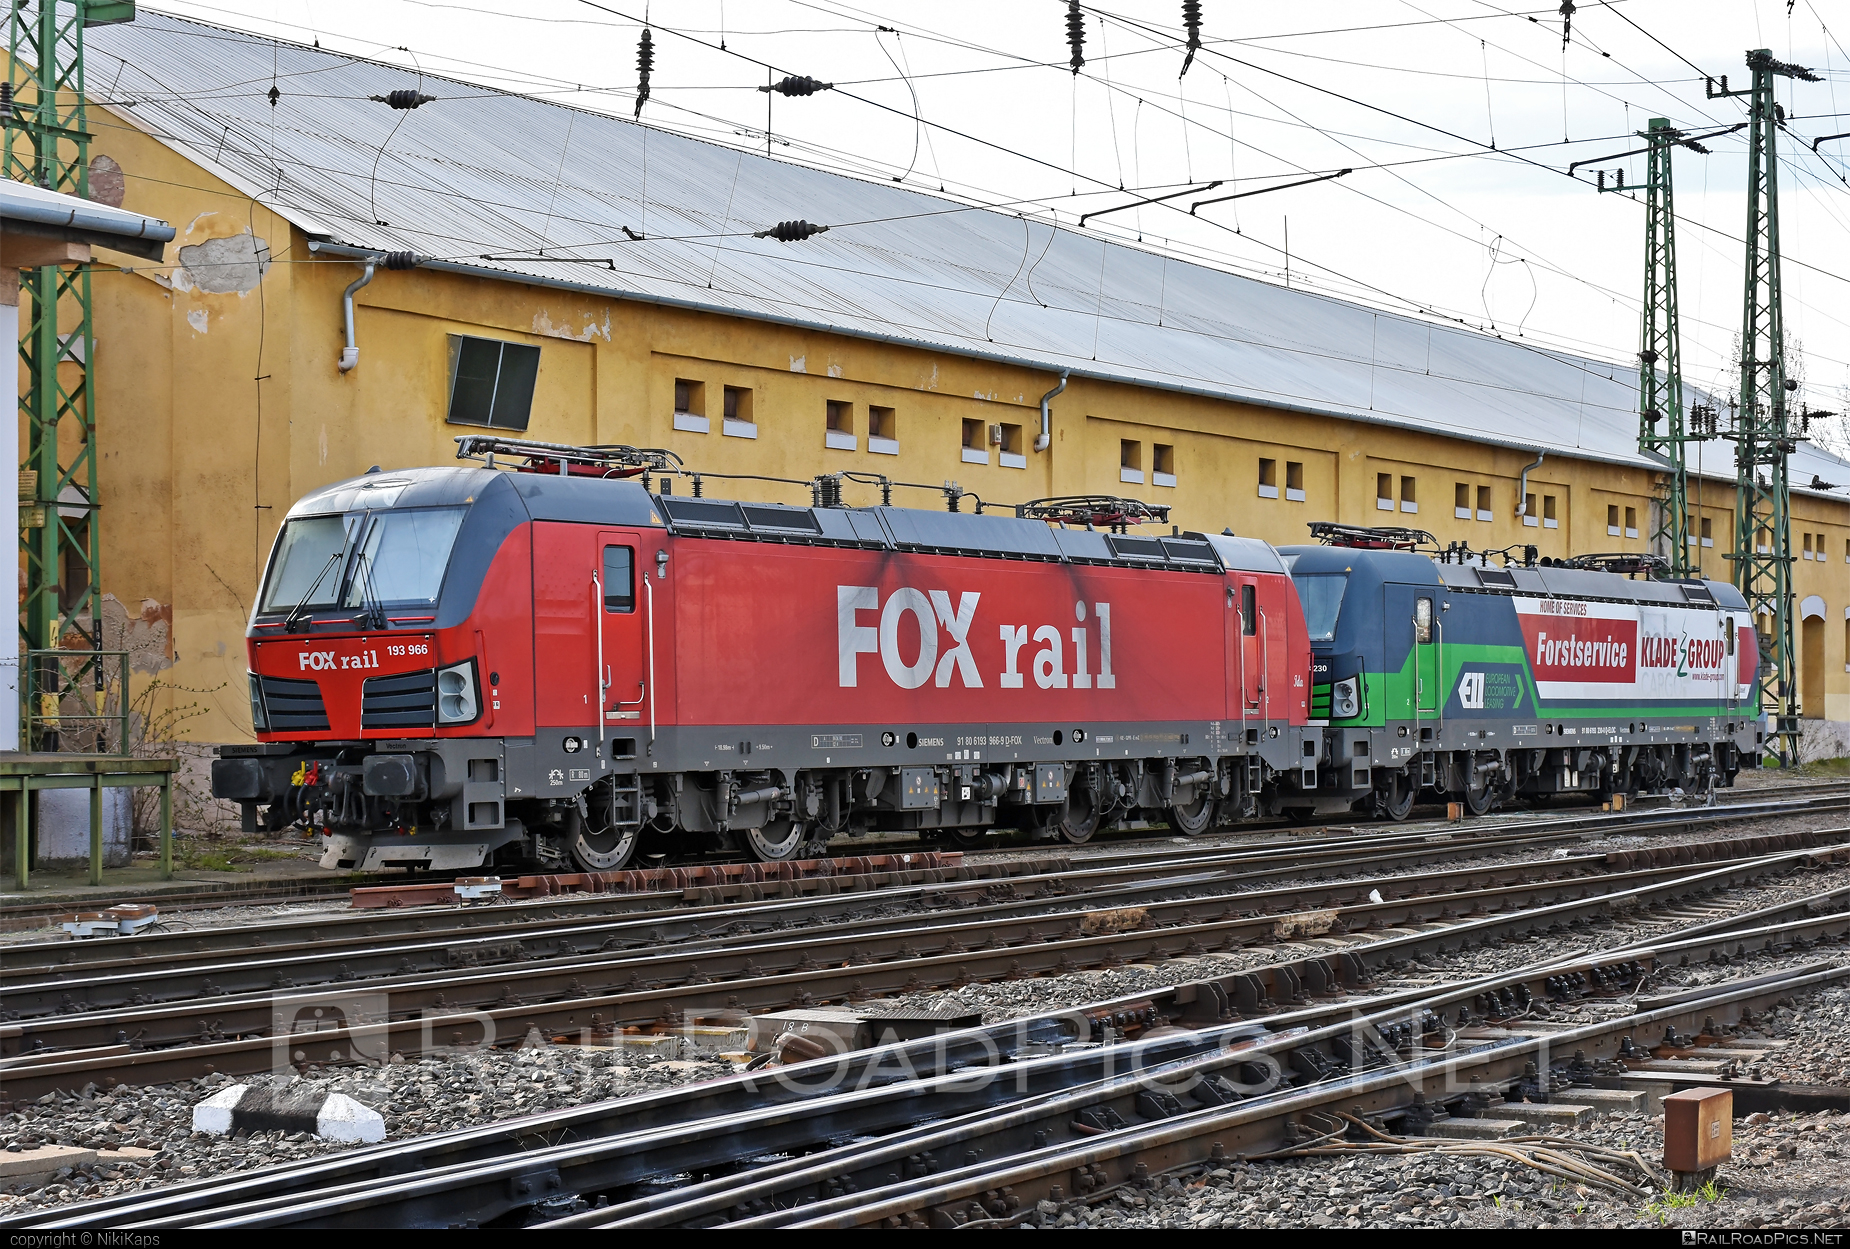 Siemens Vectron AC - 193 966 operated by FOXrail Zrt. #foxrail #siemens #siemensVectron #siemensVectronAC #vectron #vectronAC